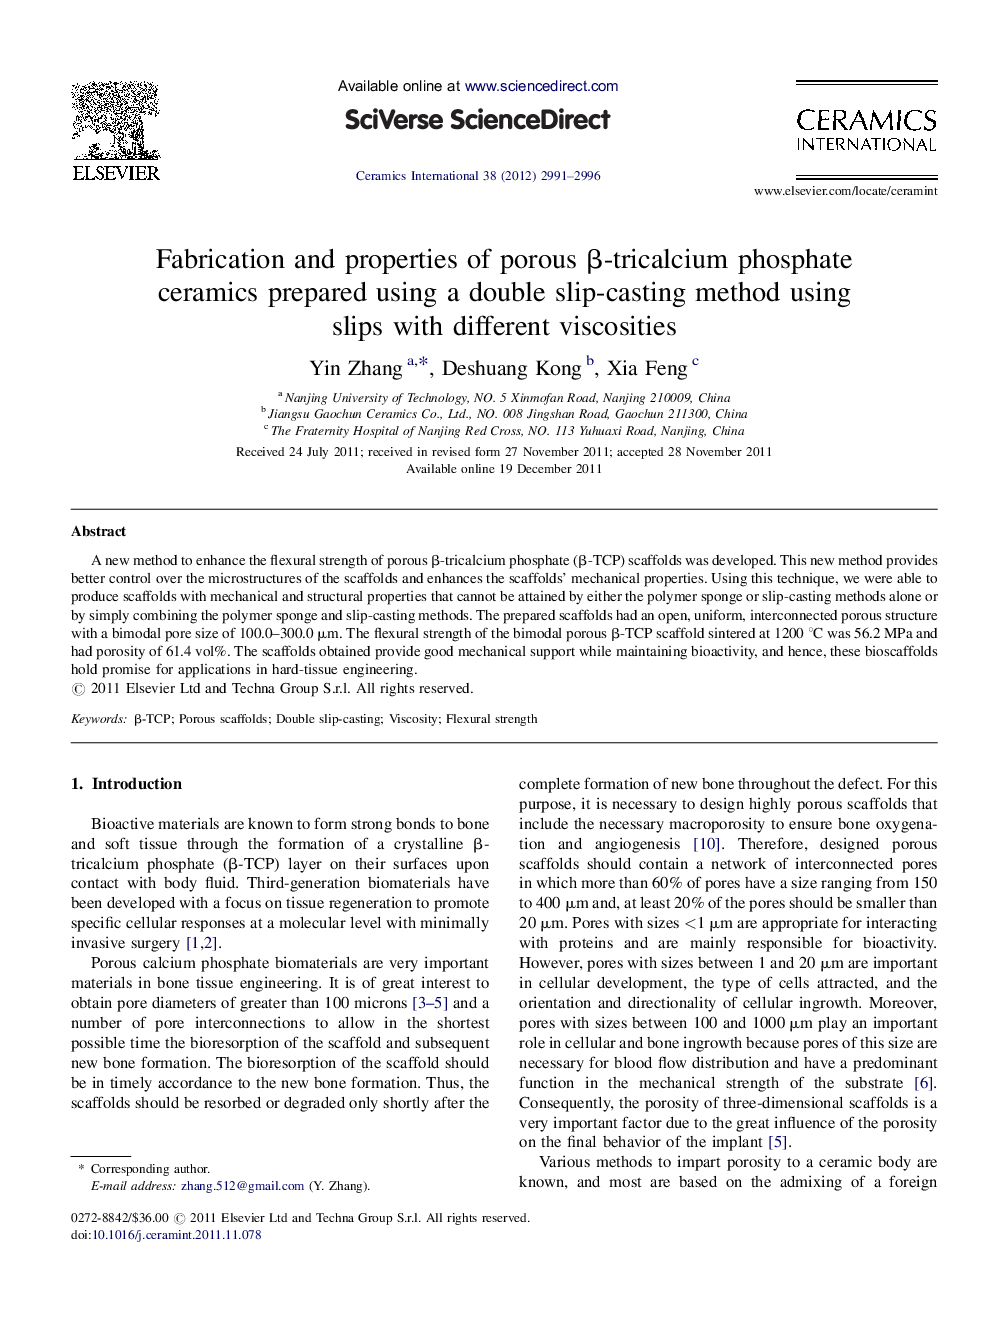 Fabrication and properties of porous β-tricalcium phosphate ceramics prepared using a double slip-casting method using slips with different viscosities